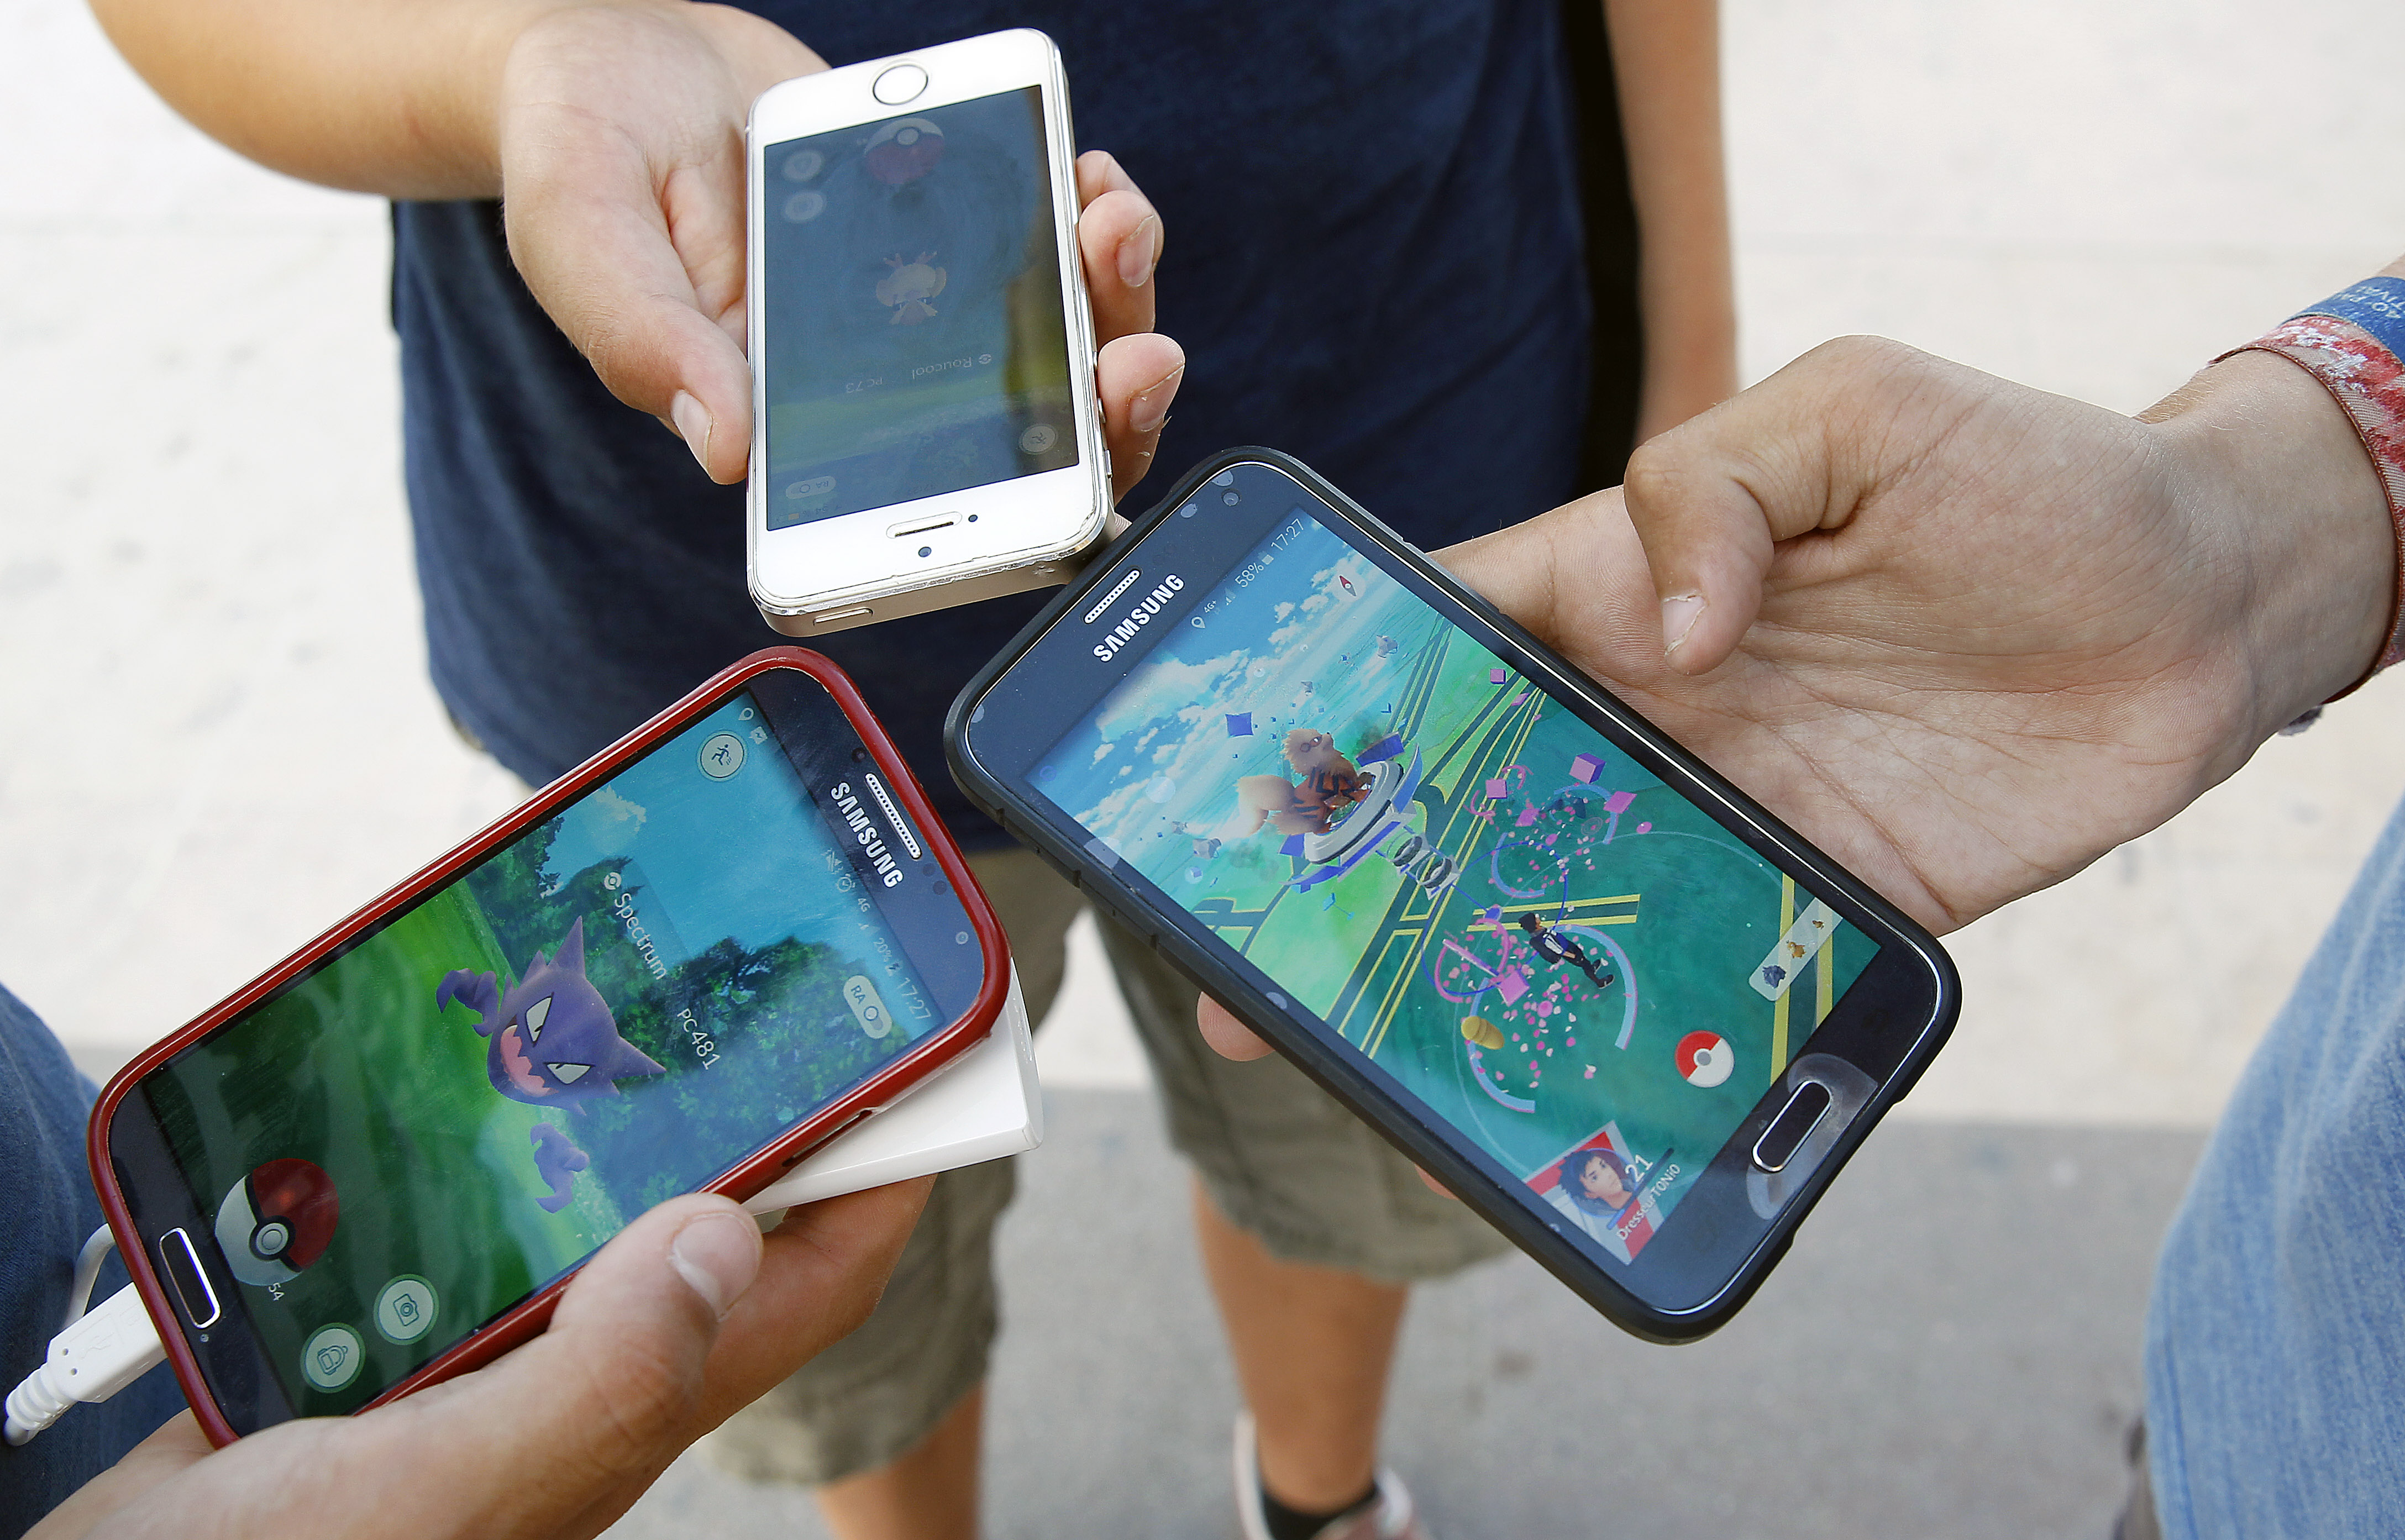 PARIS, FRANCE - SEPTEMBER 08:  Kids show the screen of their smartphone with Nintendo Co.'s Pokemon Go augmented-reality game at the Trocadero in front of the Eiffel tower on September 8, 2016 in Paris, France. (Chesnot—Getty Images)